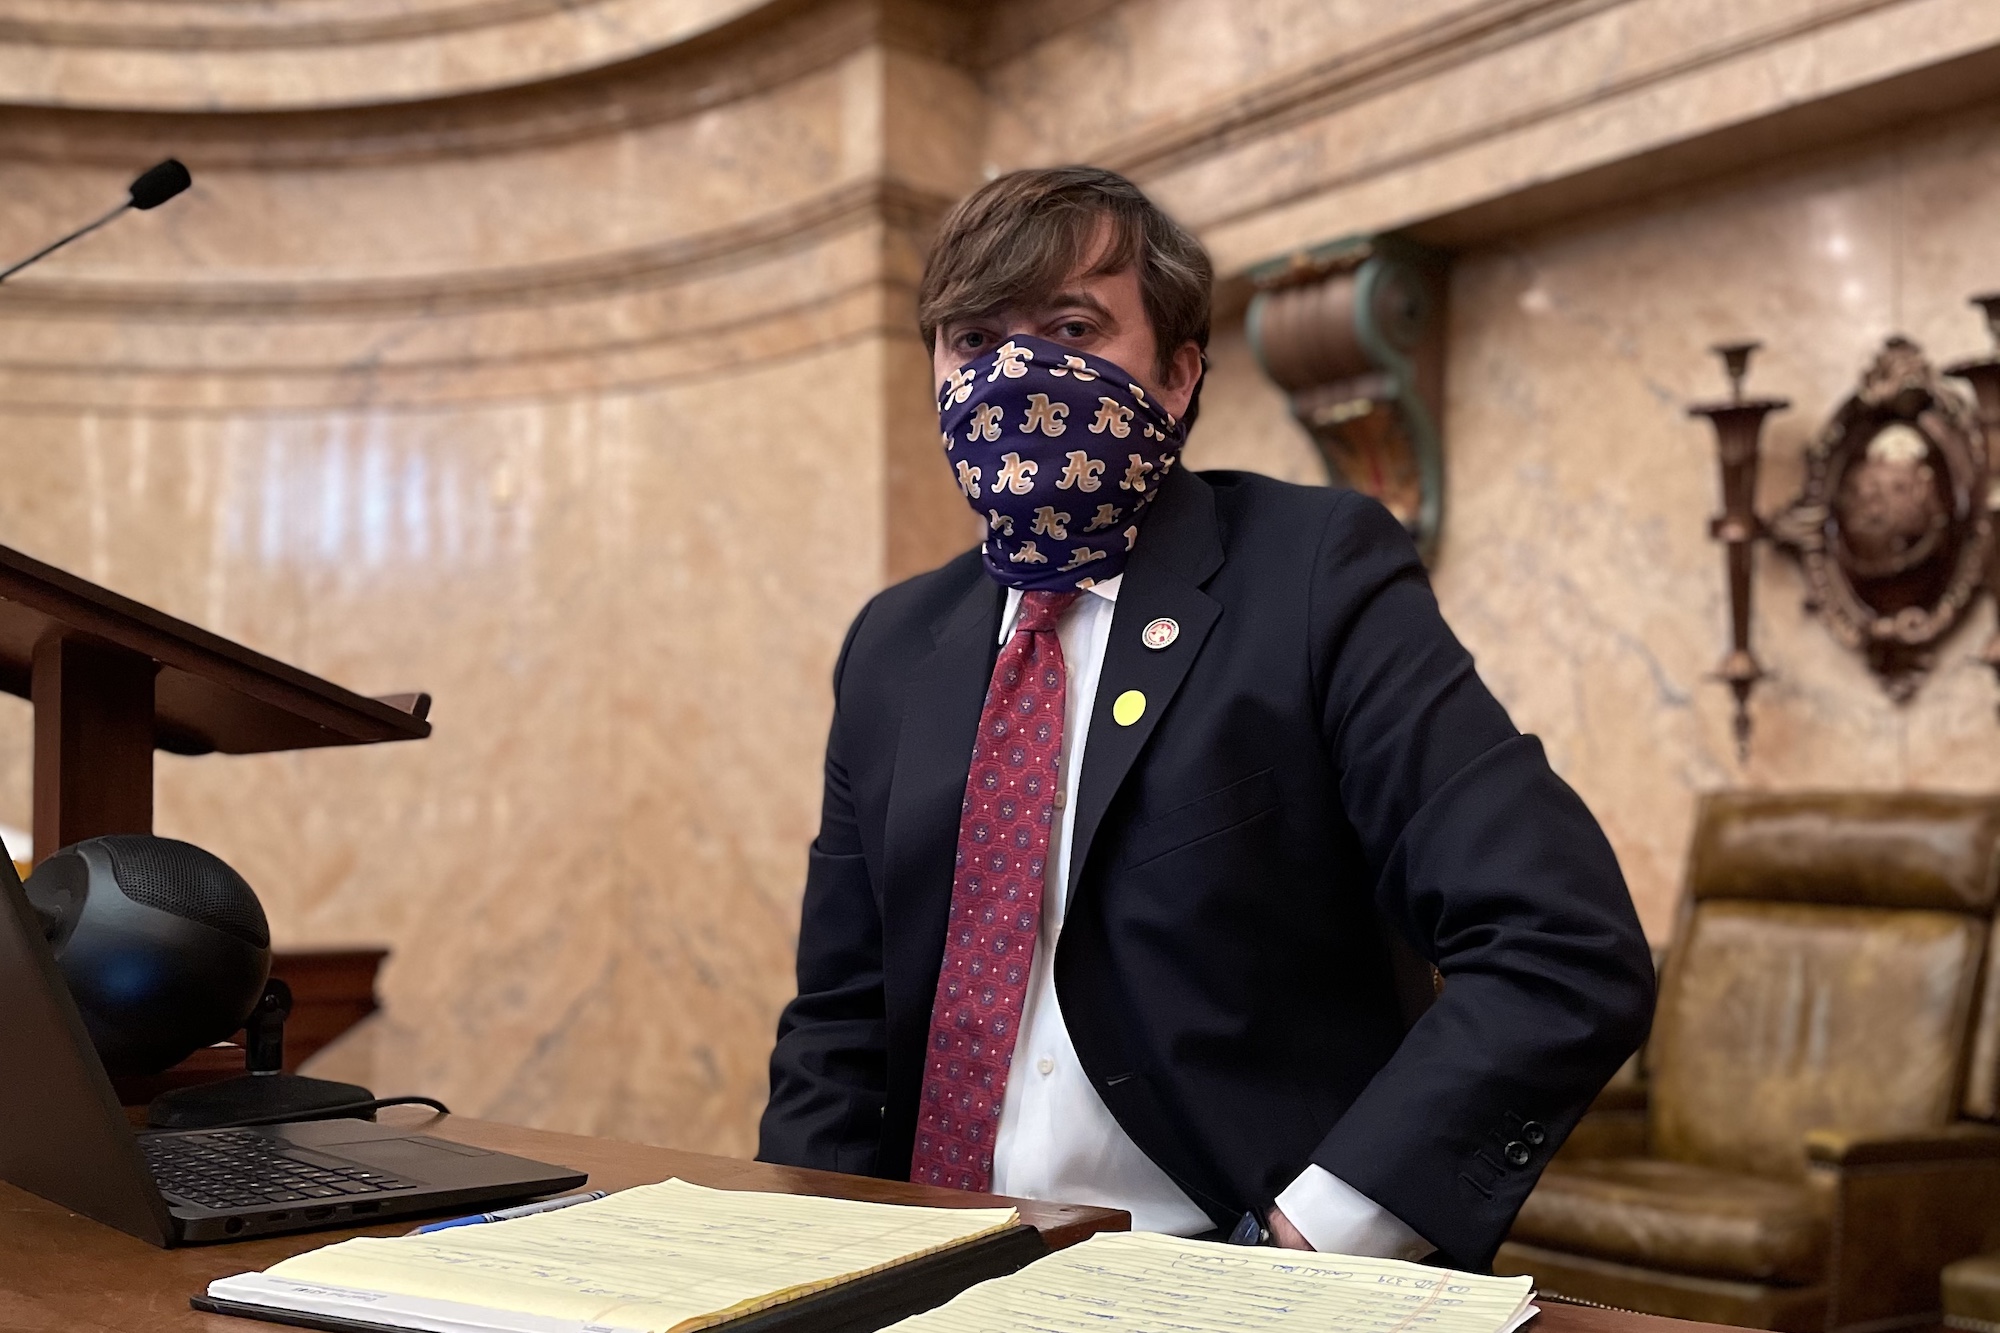 Representative Nick Bain, wearing a mask, stands in the Mississippi House